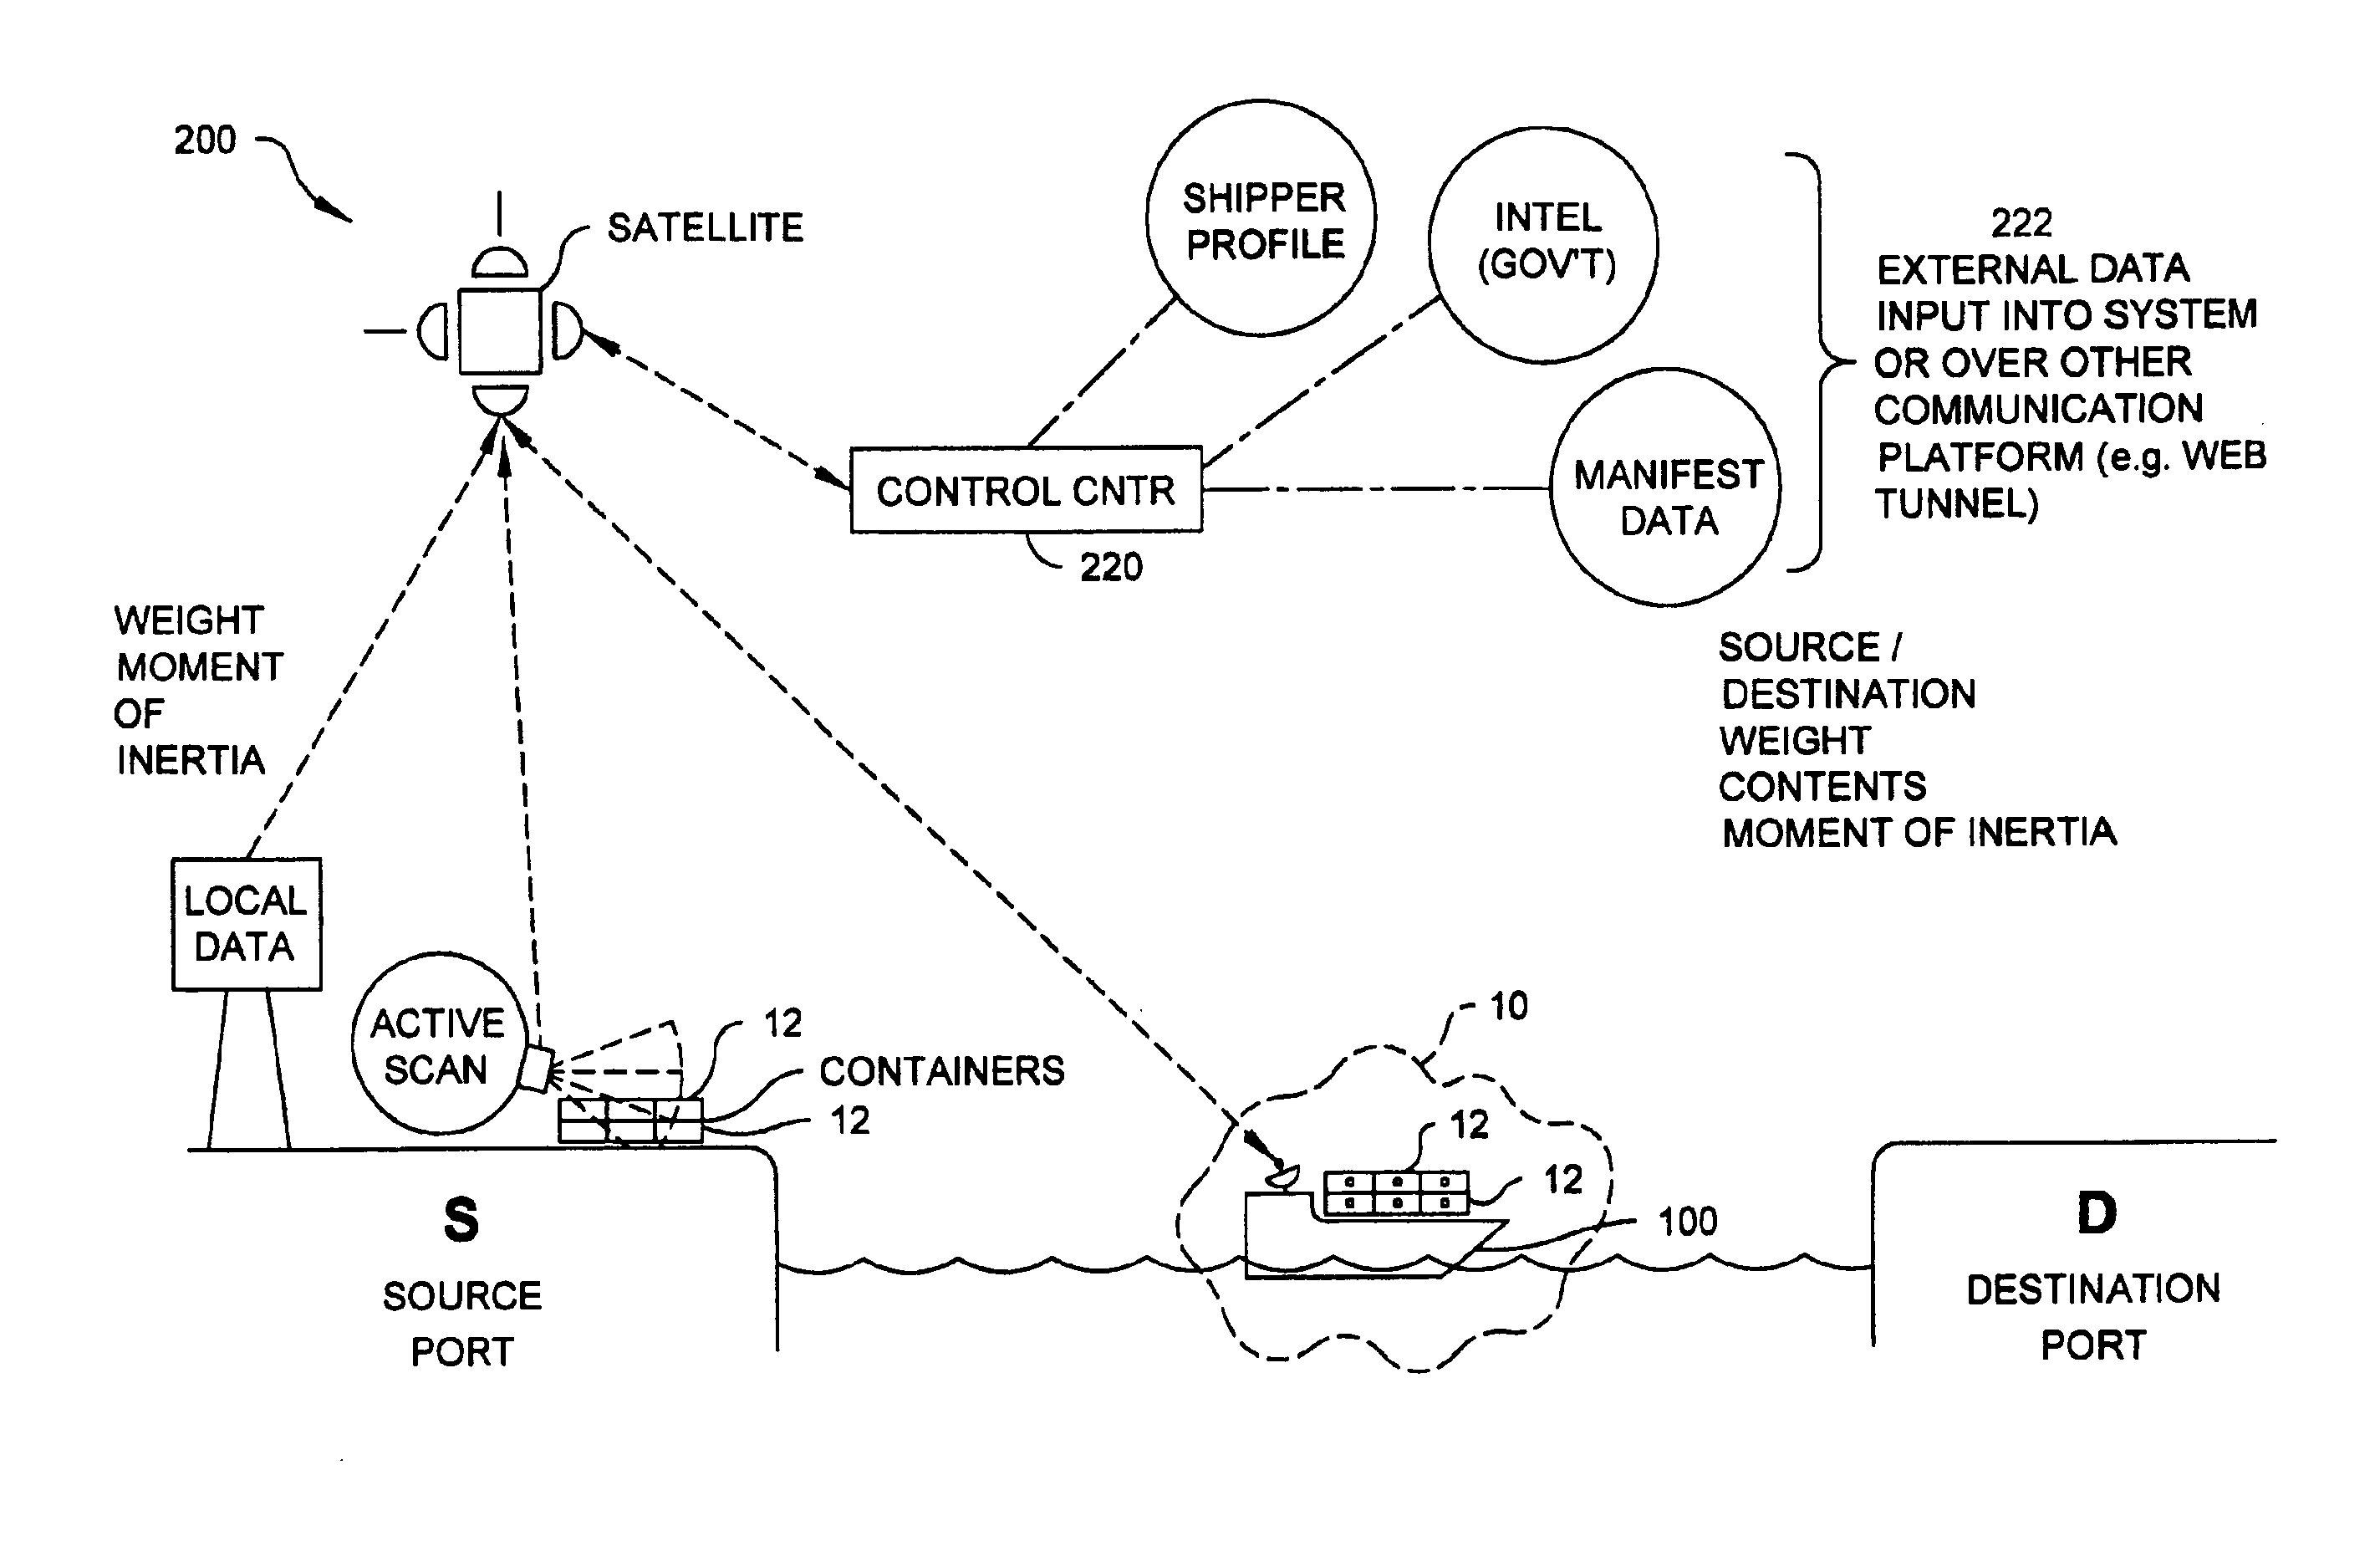 Apparatus and method for asynchronously analyzing data to detect radioactive material